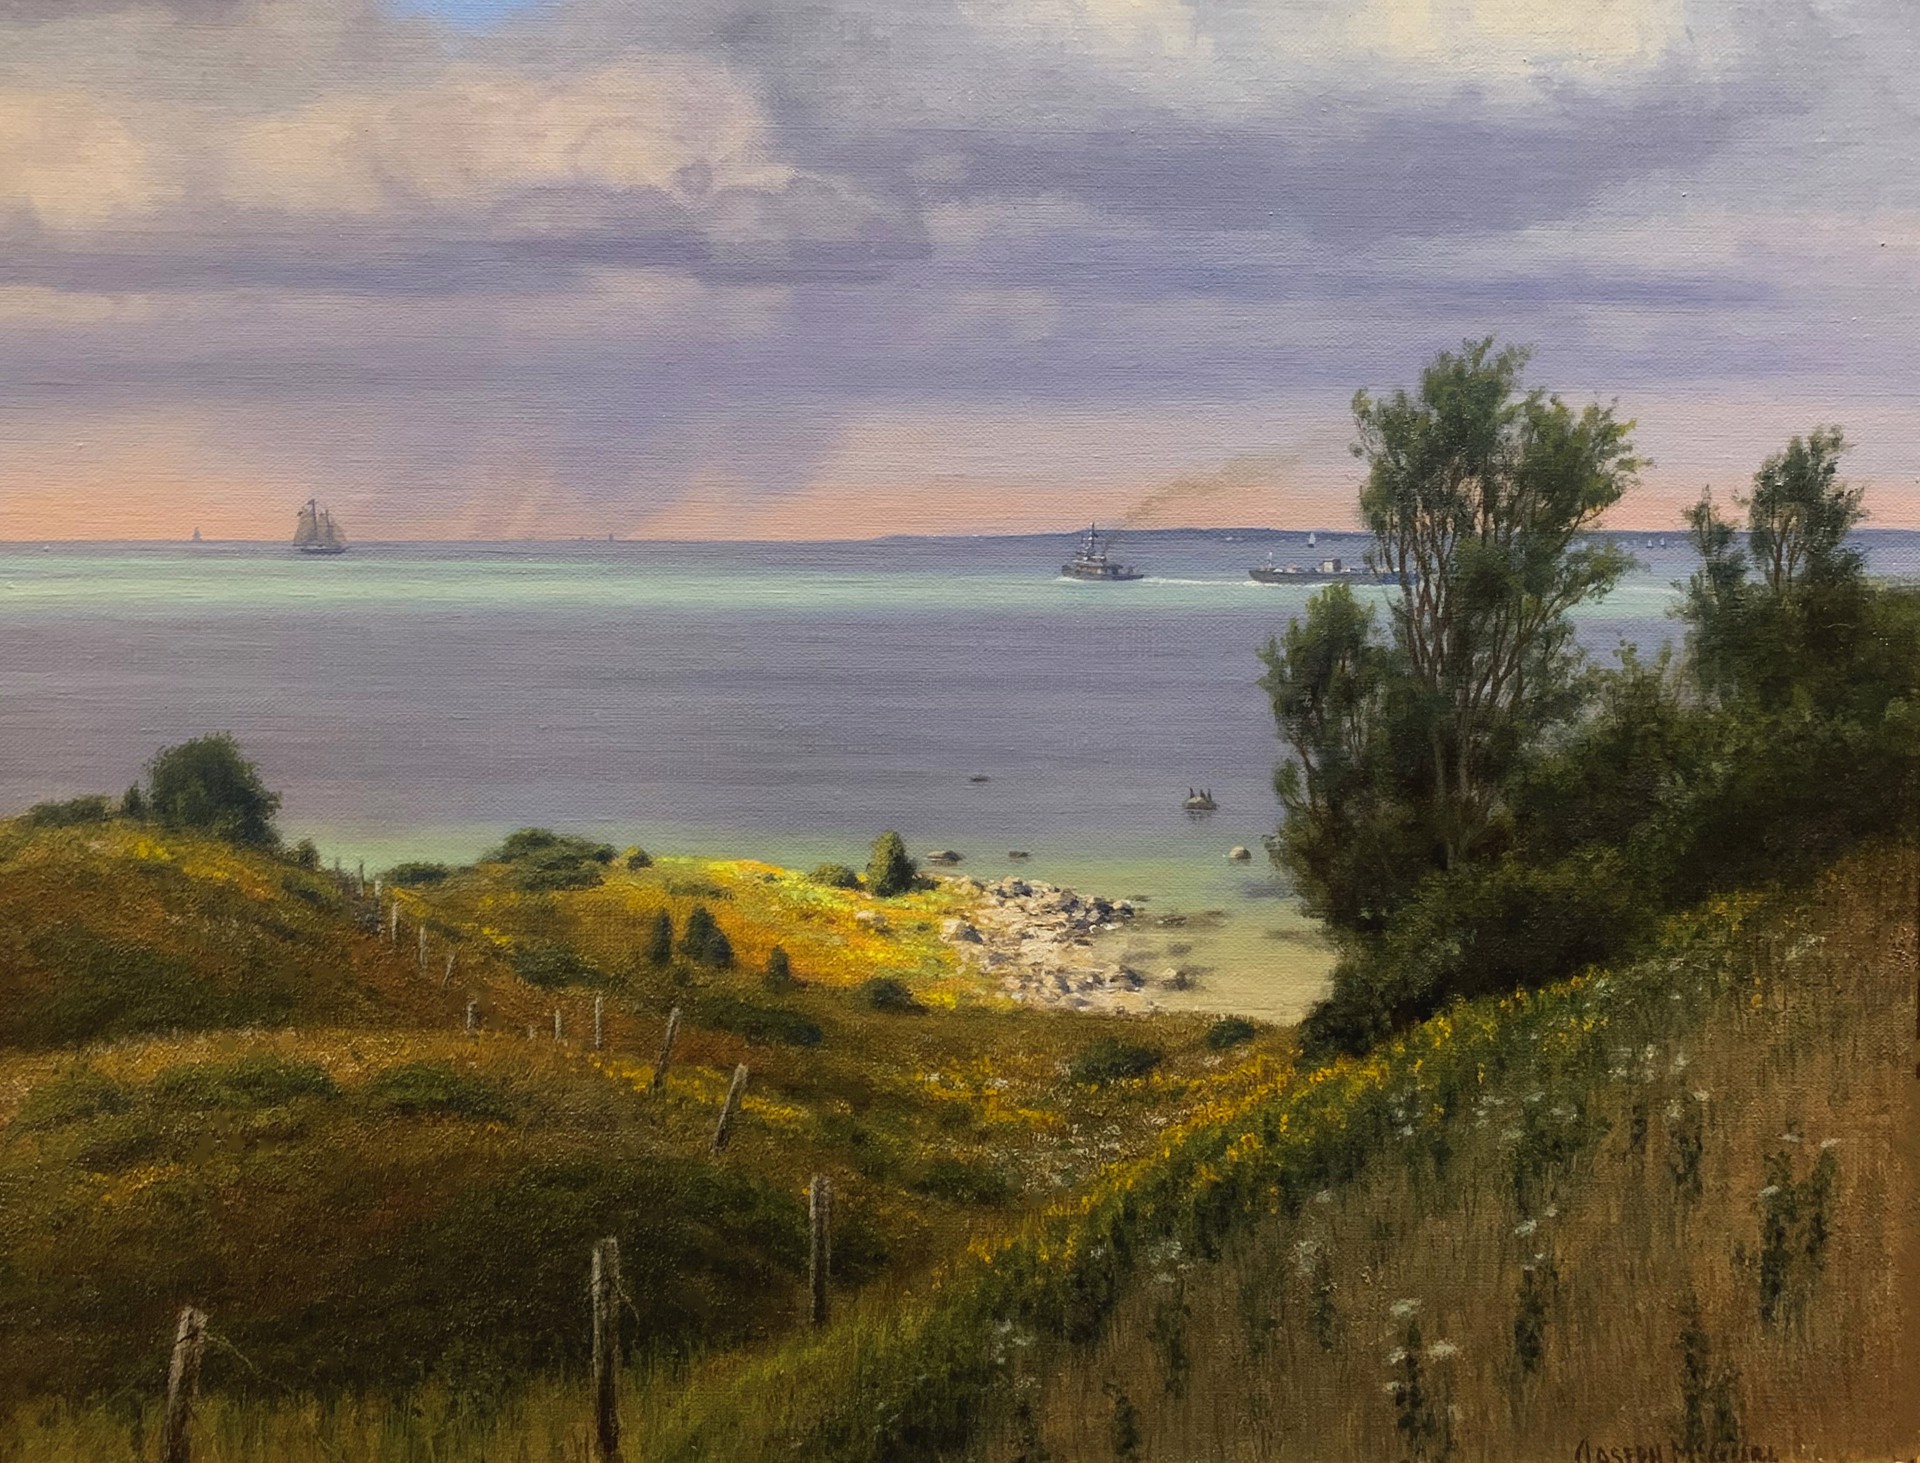 Clearing Weather, Buzzard's Bay by Joseph McGurl